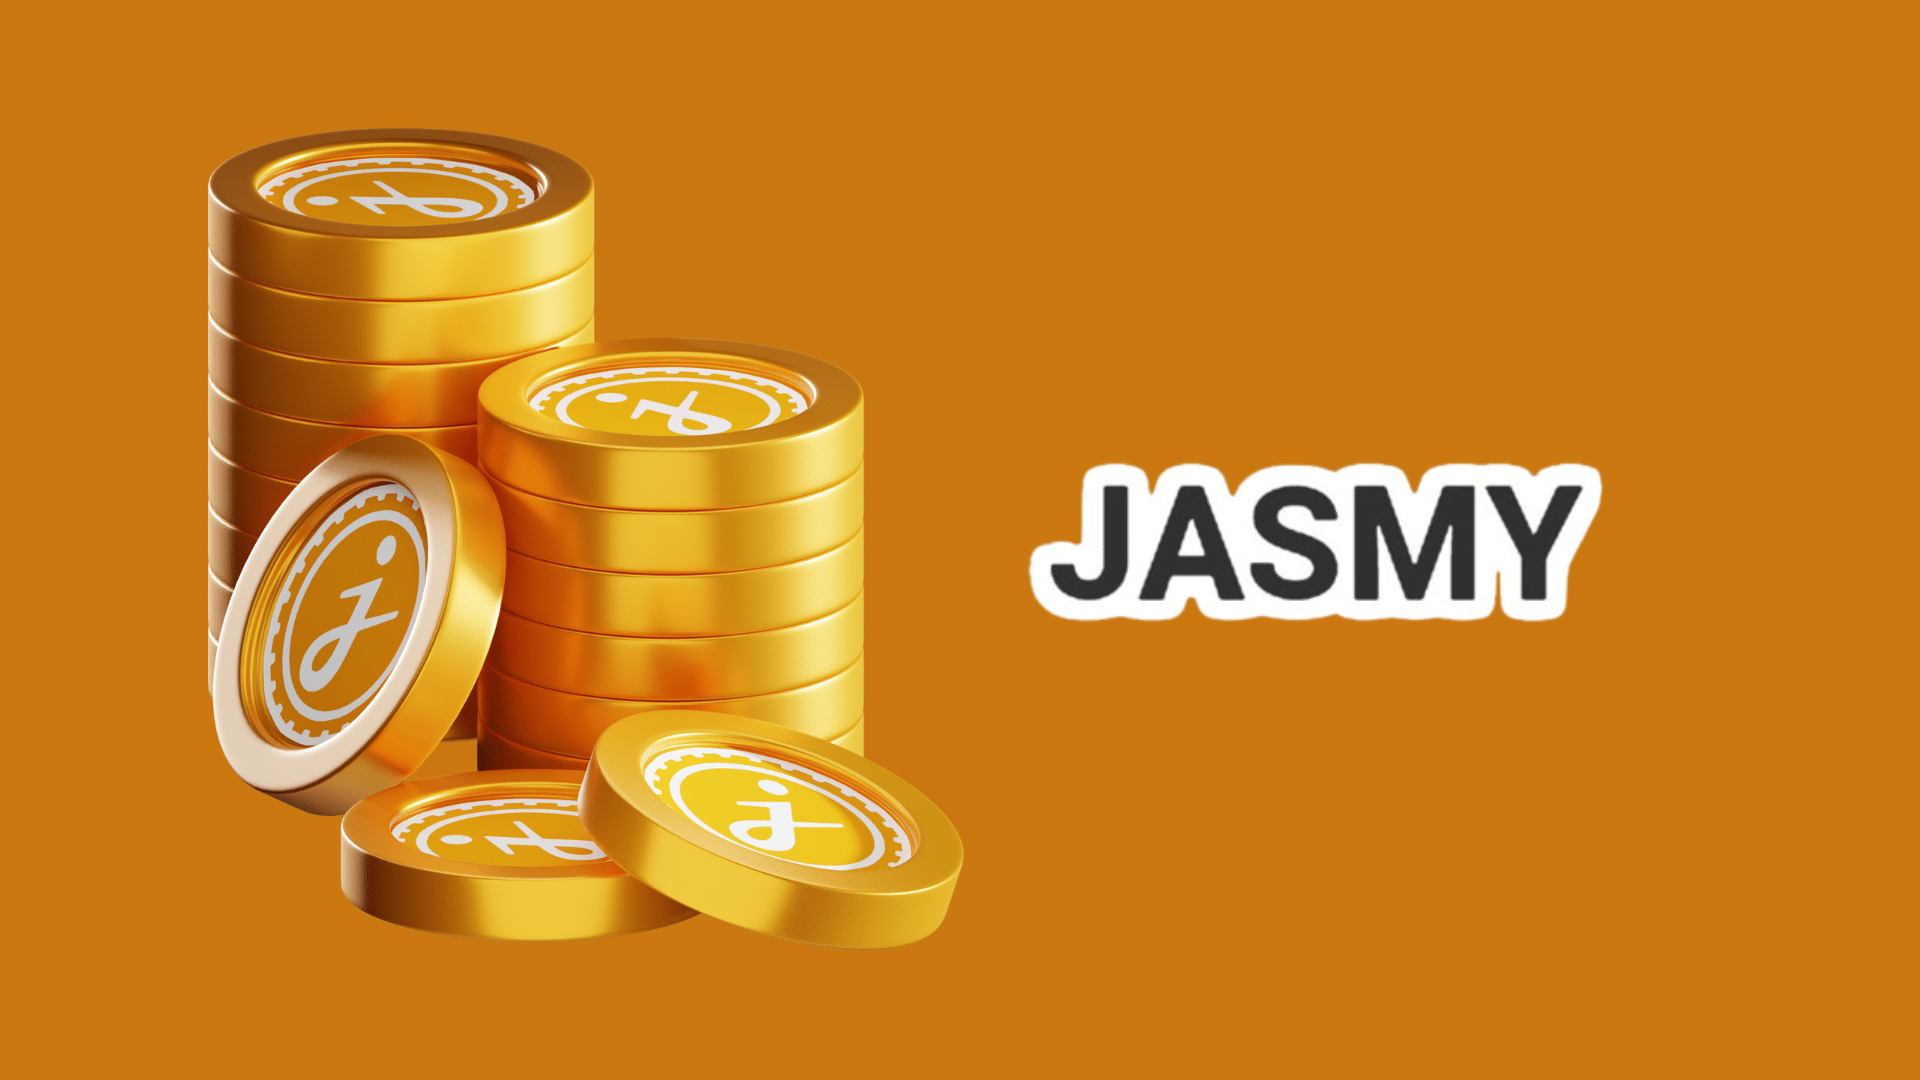 JasmyCoin Price Prediction: JASMY Soars 15% And An Insane 235% In A Month, But Can It Outperform This New Solana Meme Coin That’s Challenging Bonk ($BONK) and Myro ($MYRO)